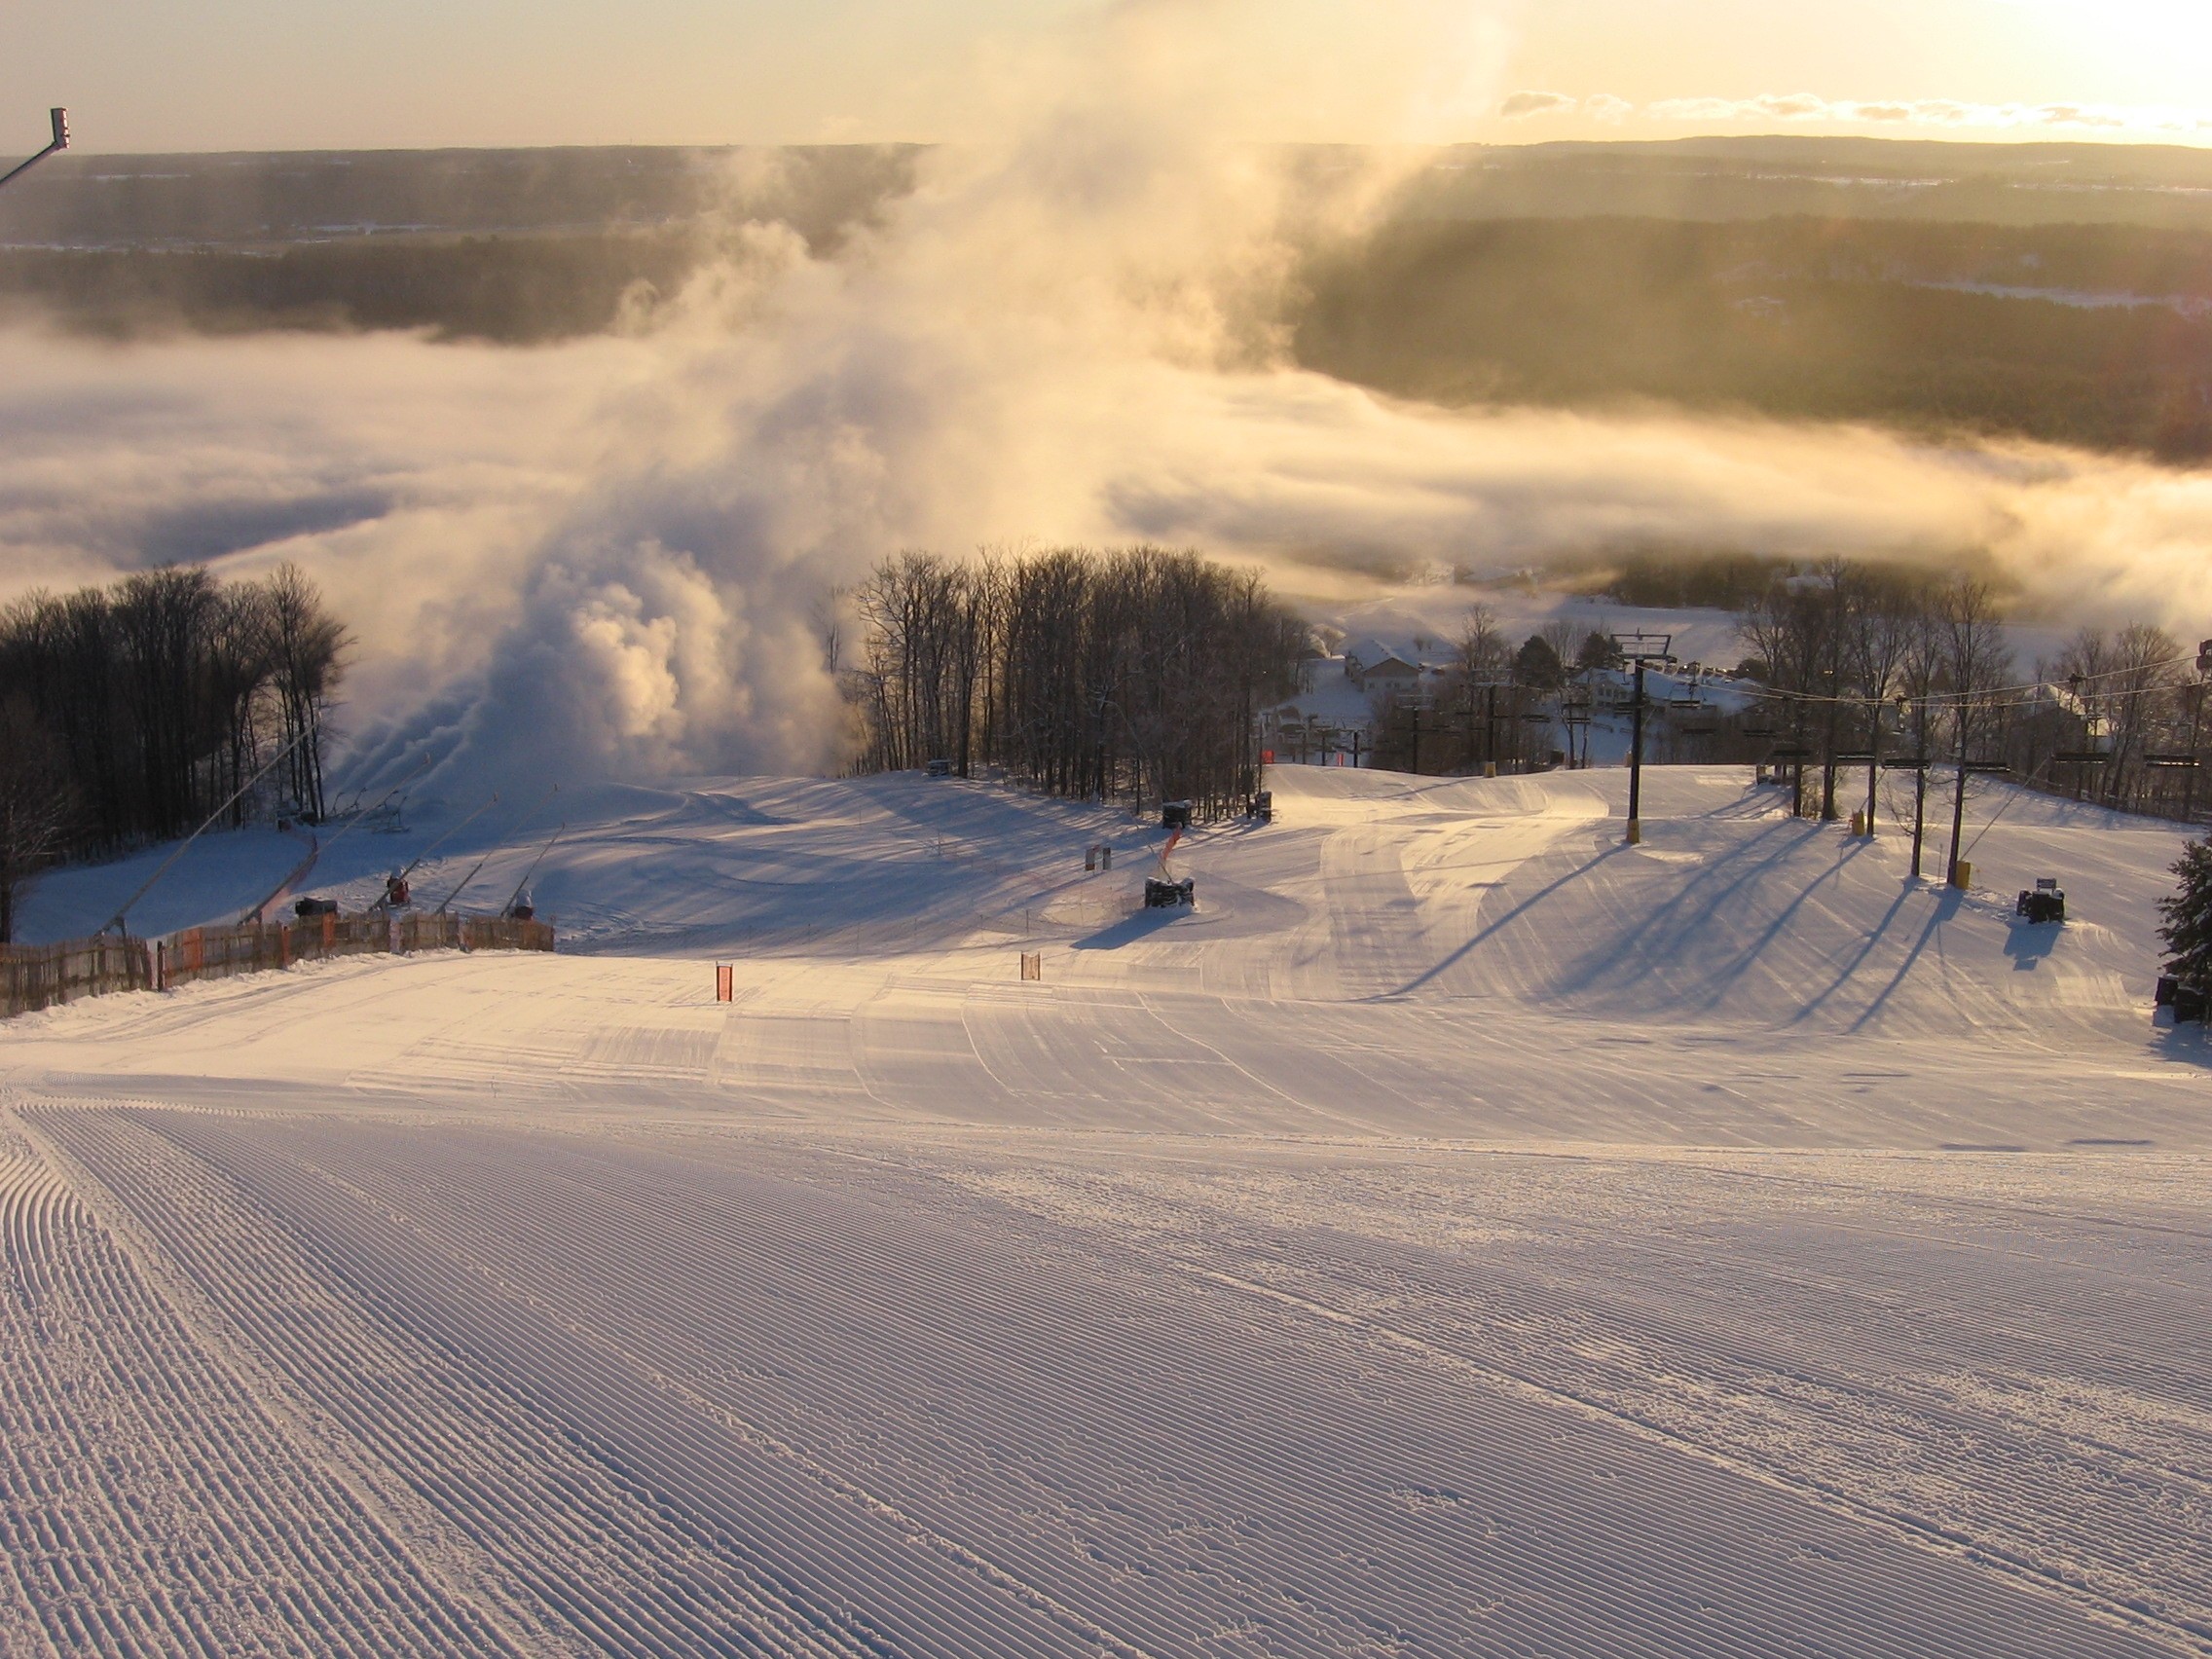 Opening Day delayed until December 4th - Mount St. Louis Moonstone